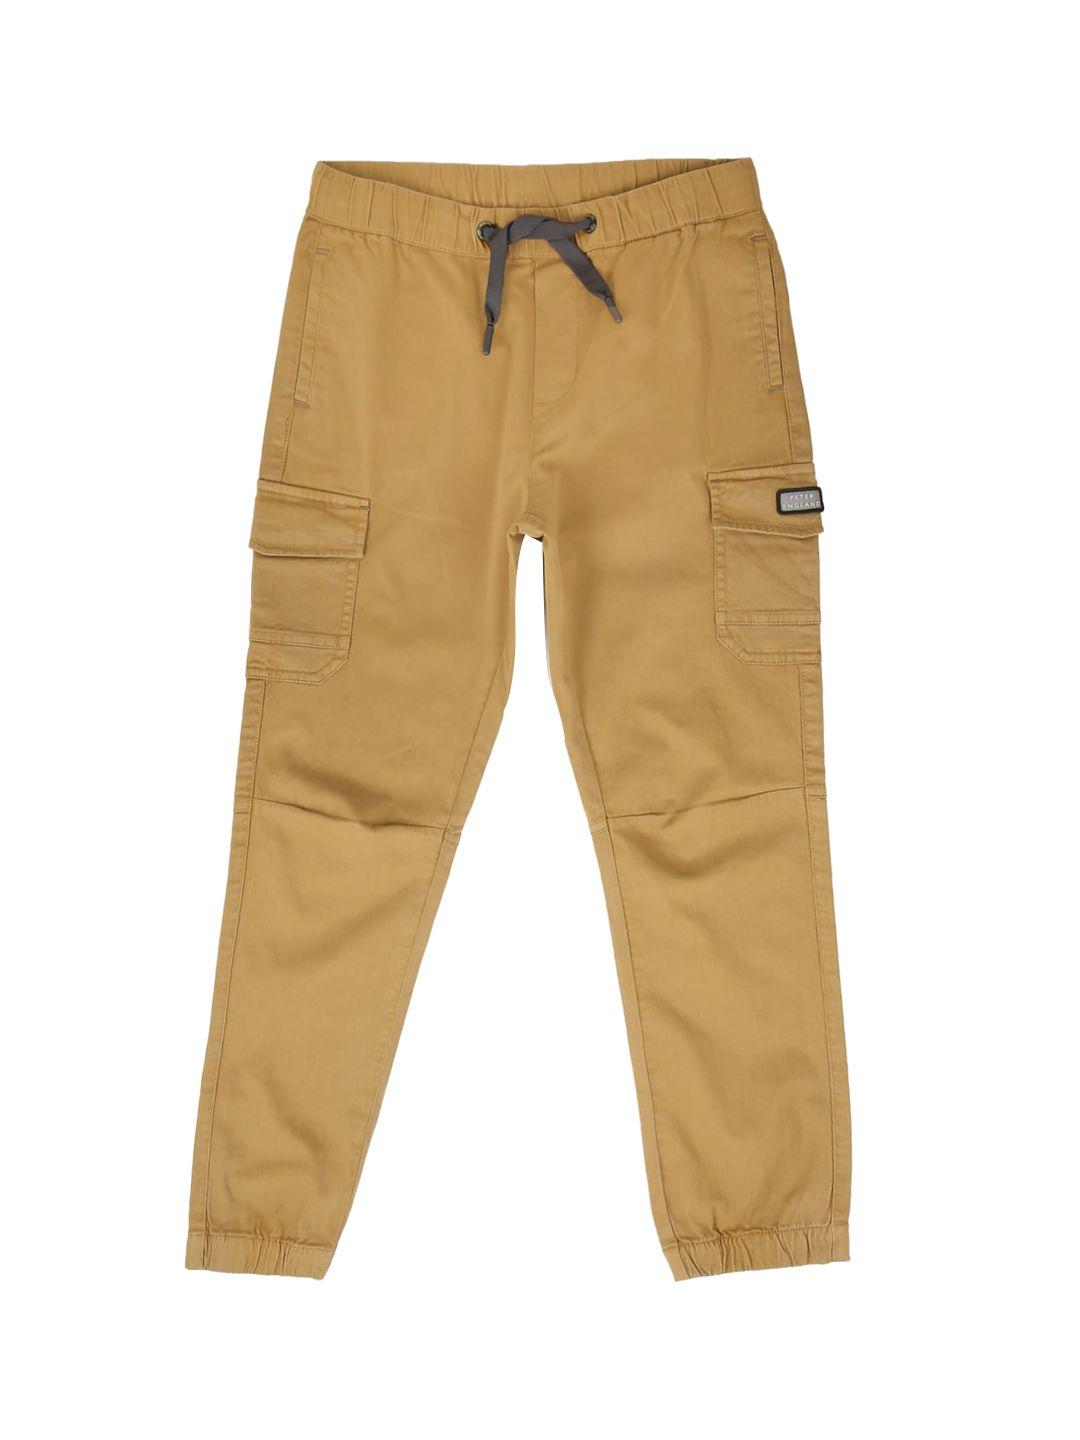 peter england boys beige joggers trousers